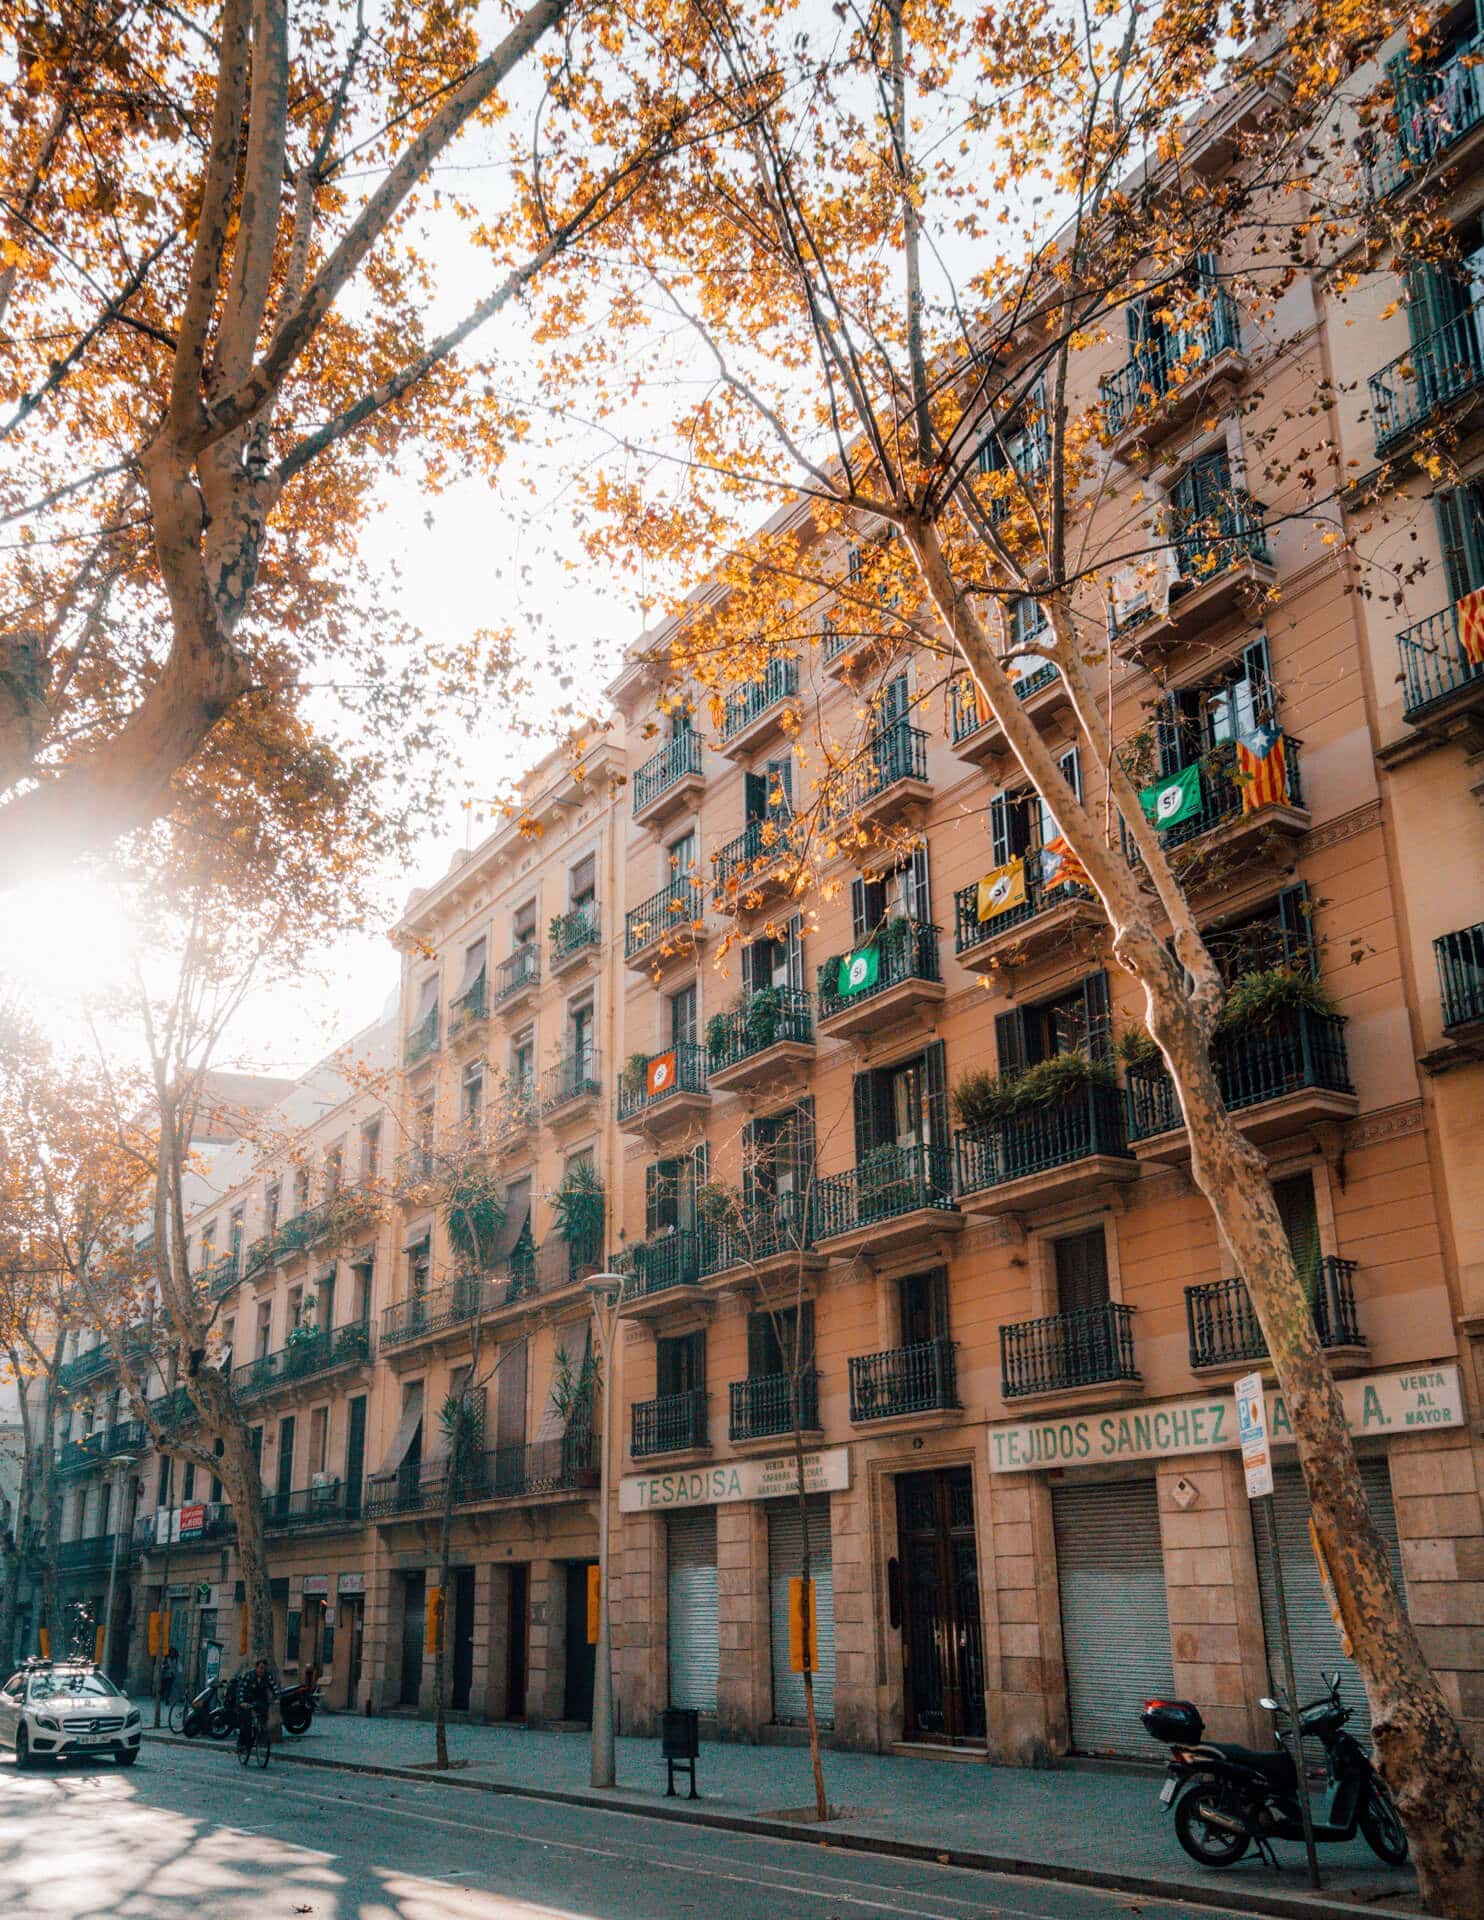 BARCELONA CITY TRIP - How to spend in Barcelona city trip guide